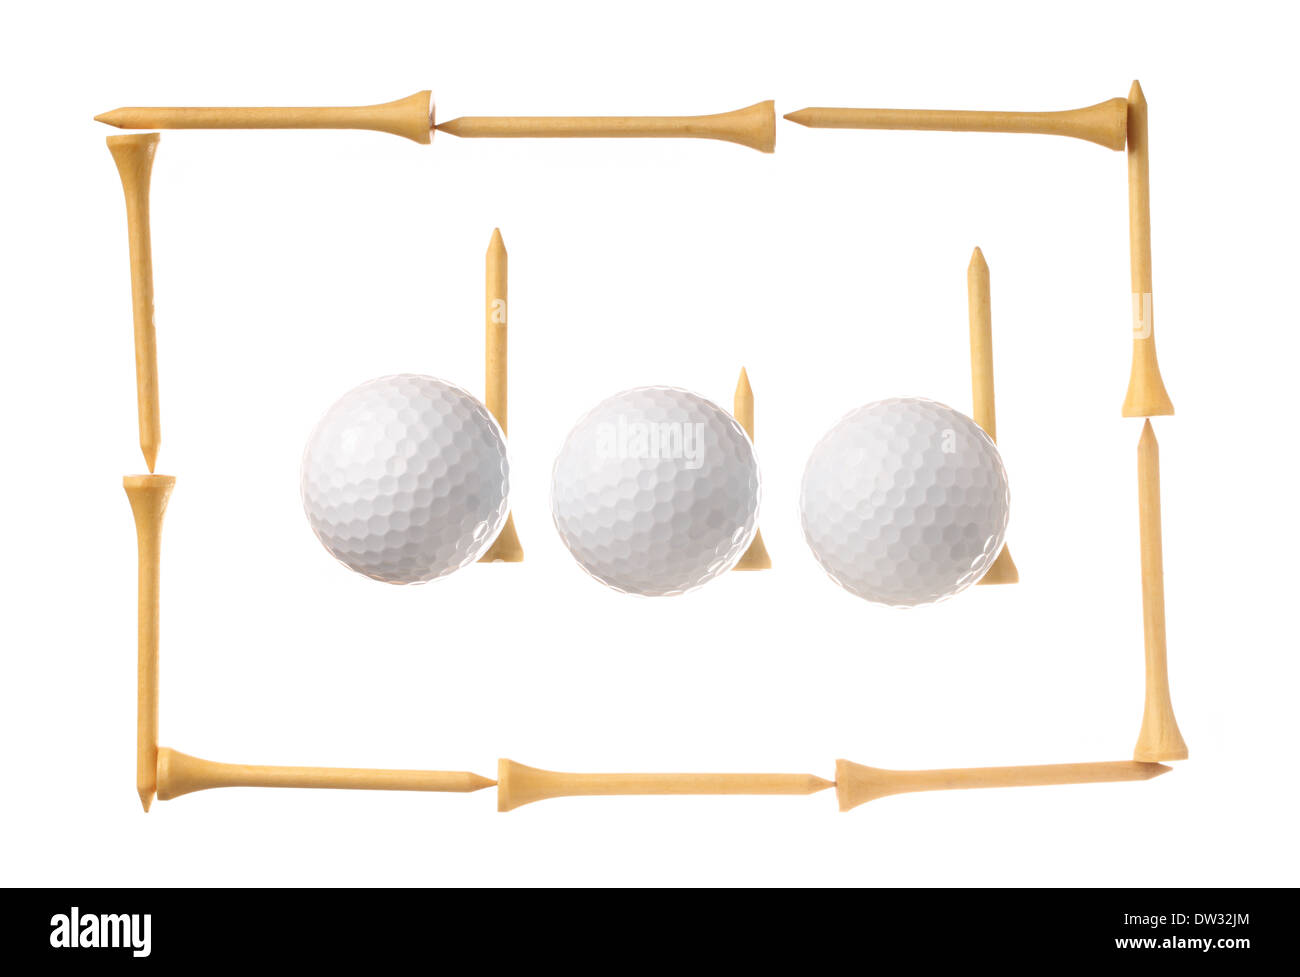 Word dad spelled with golf balls and tees on white background Stock Photo